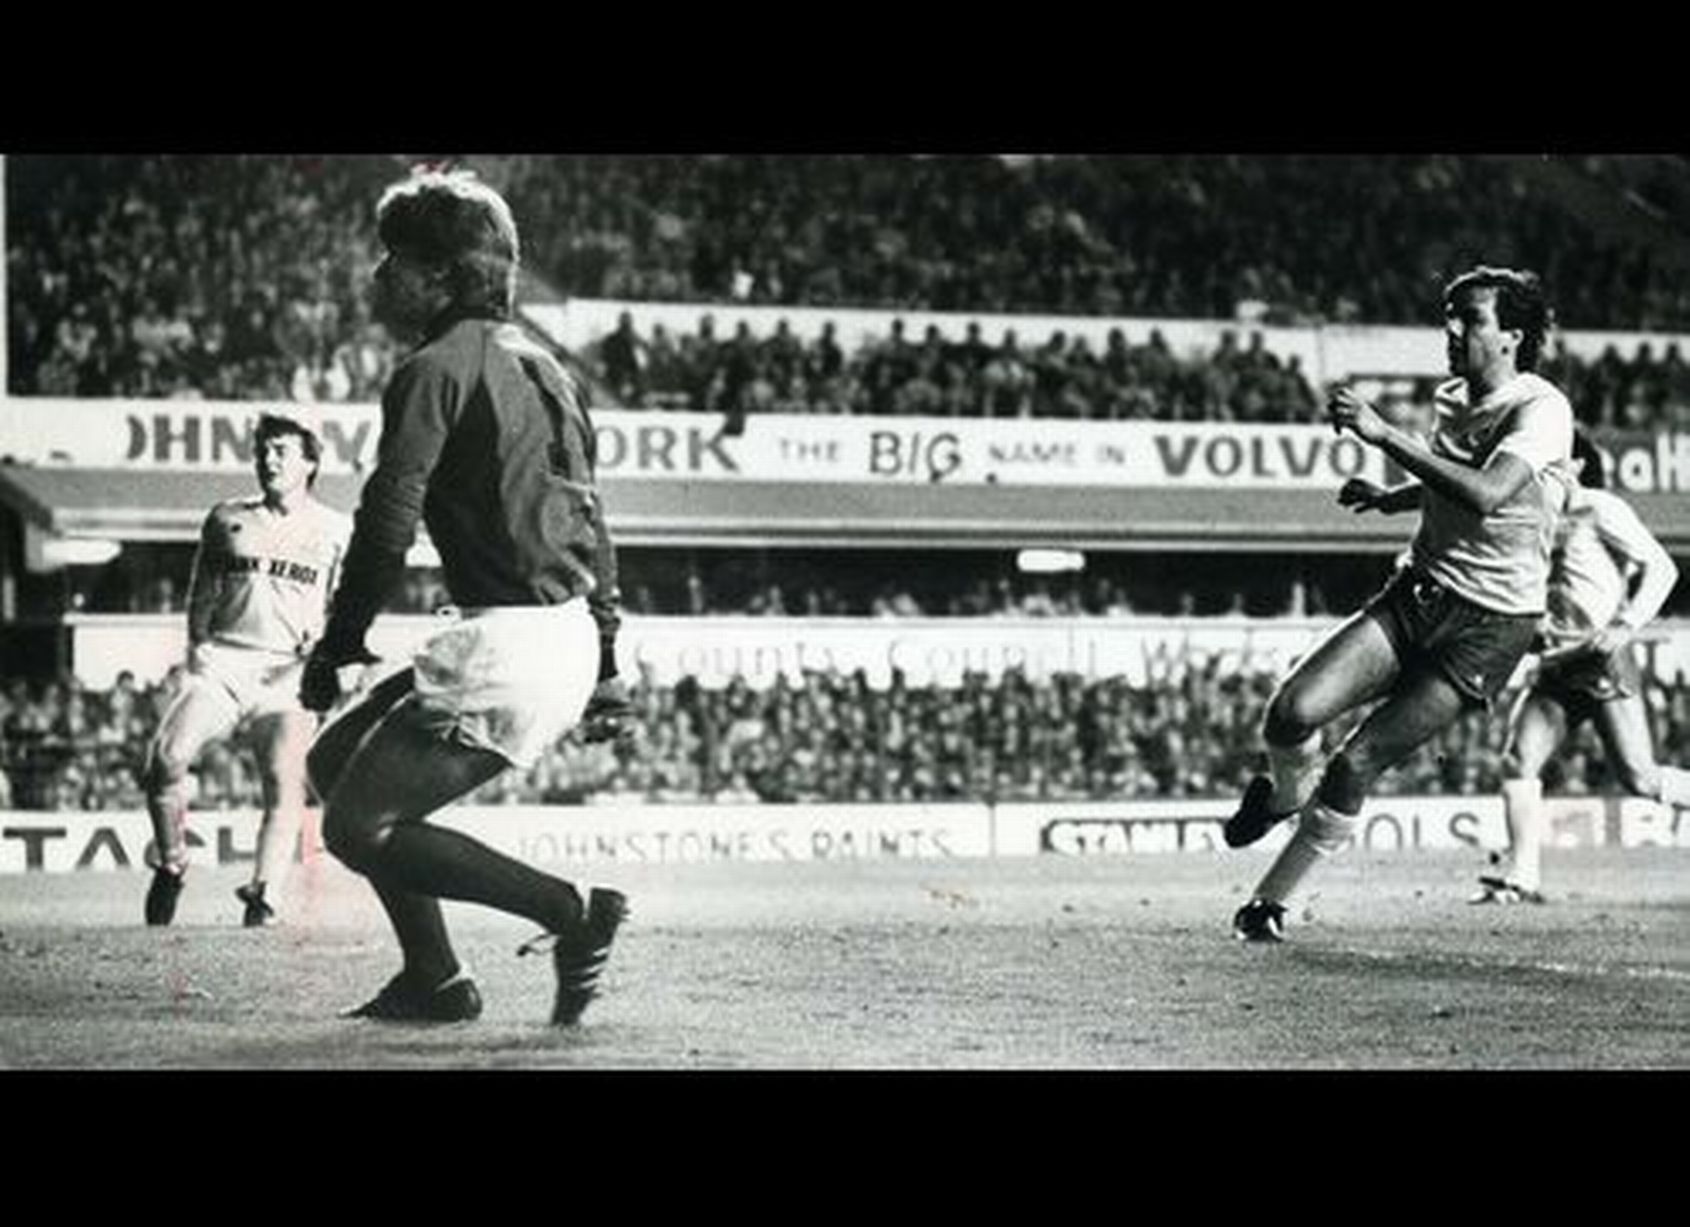 image-2-for-gallery-matchday-memories-everton-fc-s-1984-85-european-road-to-glory-658447104.jpg